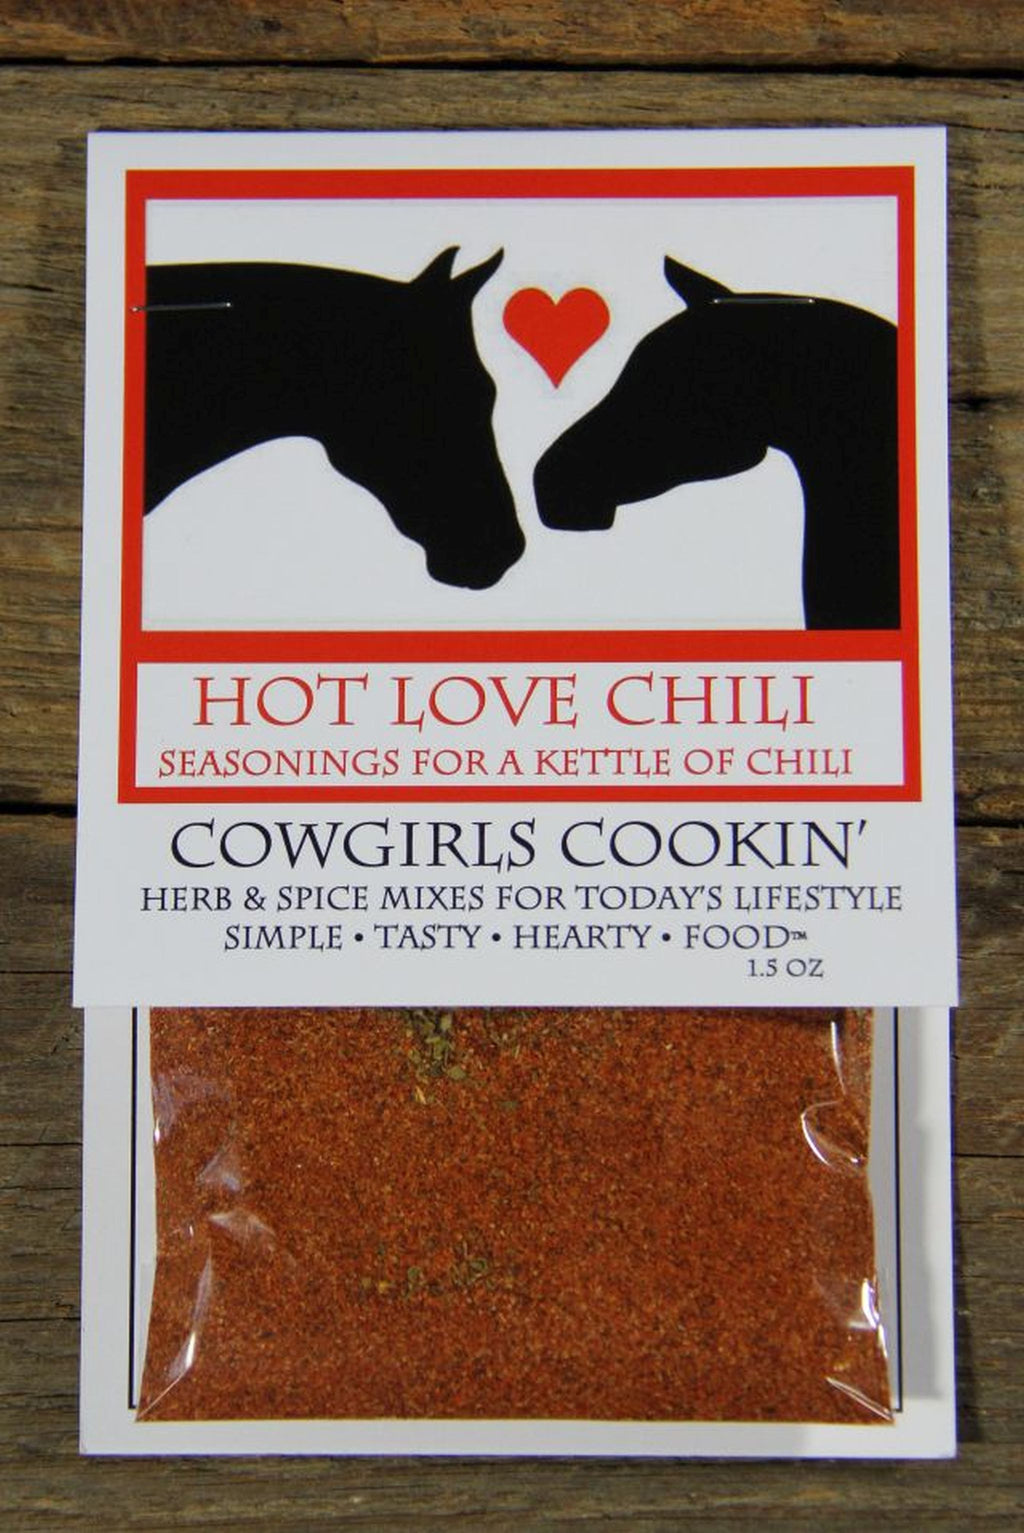 Cowgirls Cookin', Chili recipes, chili mixes, chili seasoning, chili peppers, chili from scratch, chili con carne, chili seasoning mixes, chili with canned beans, chili from instant pot, best instant pot chili, easy instant pot chili, Buckeye Beans and Herbs 